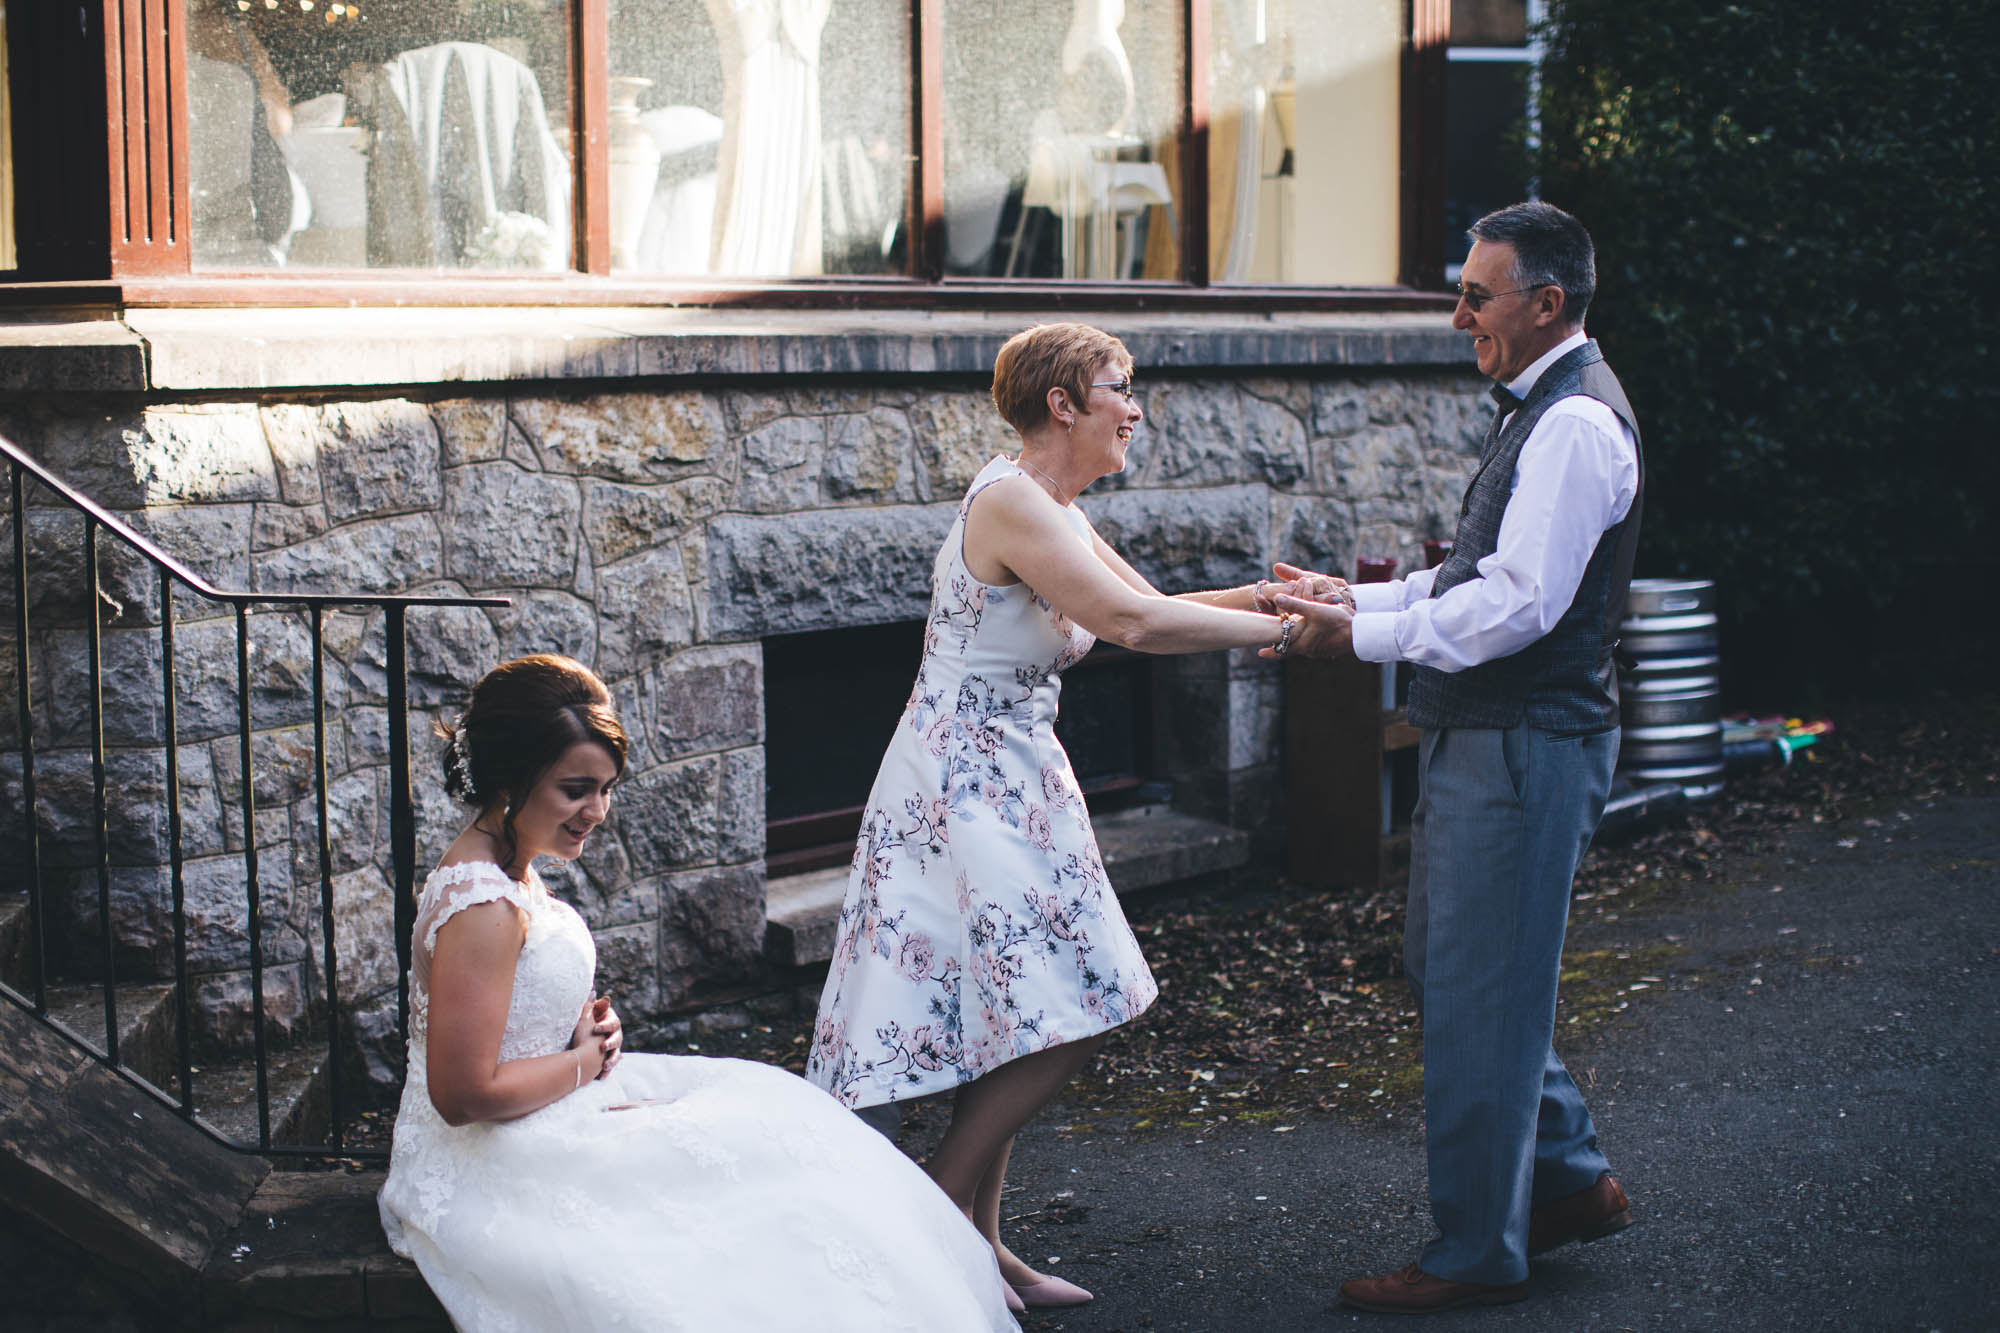 Bride sits on step while her parents dance with each other happily at wedding reception